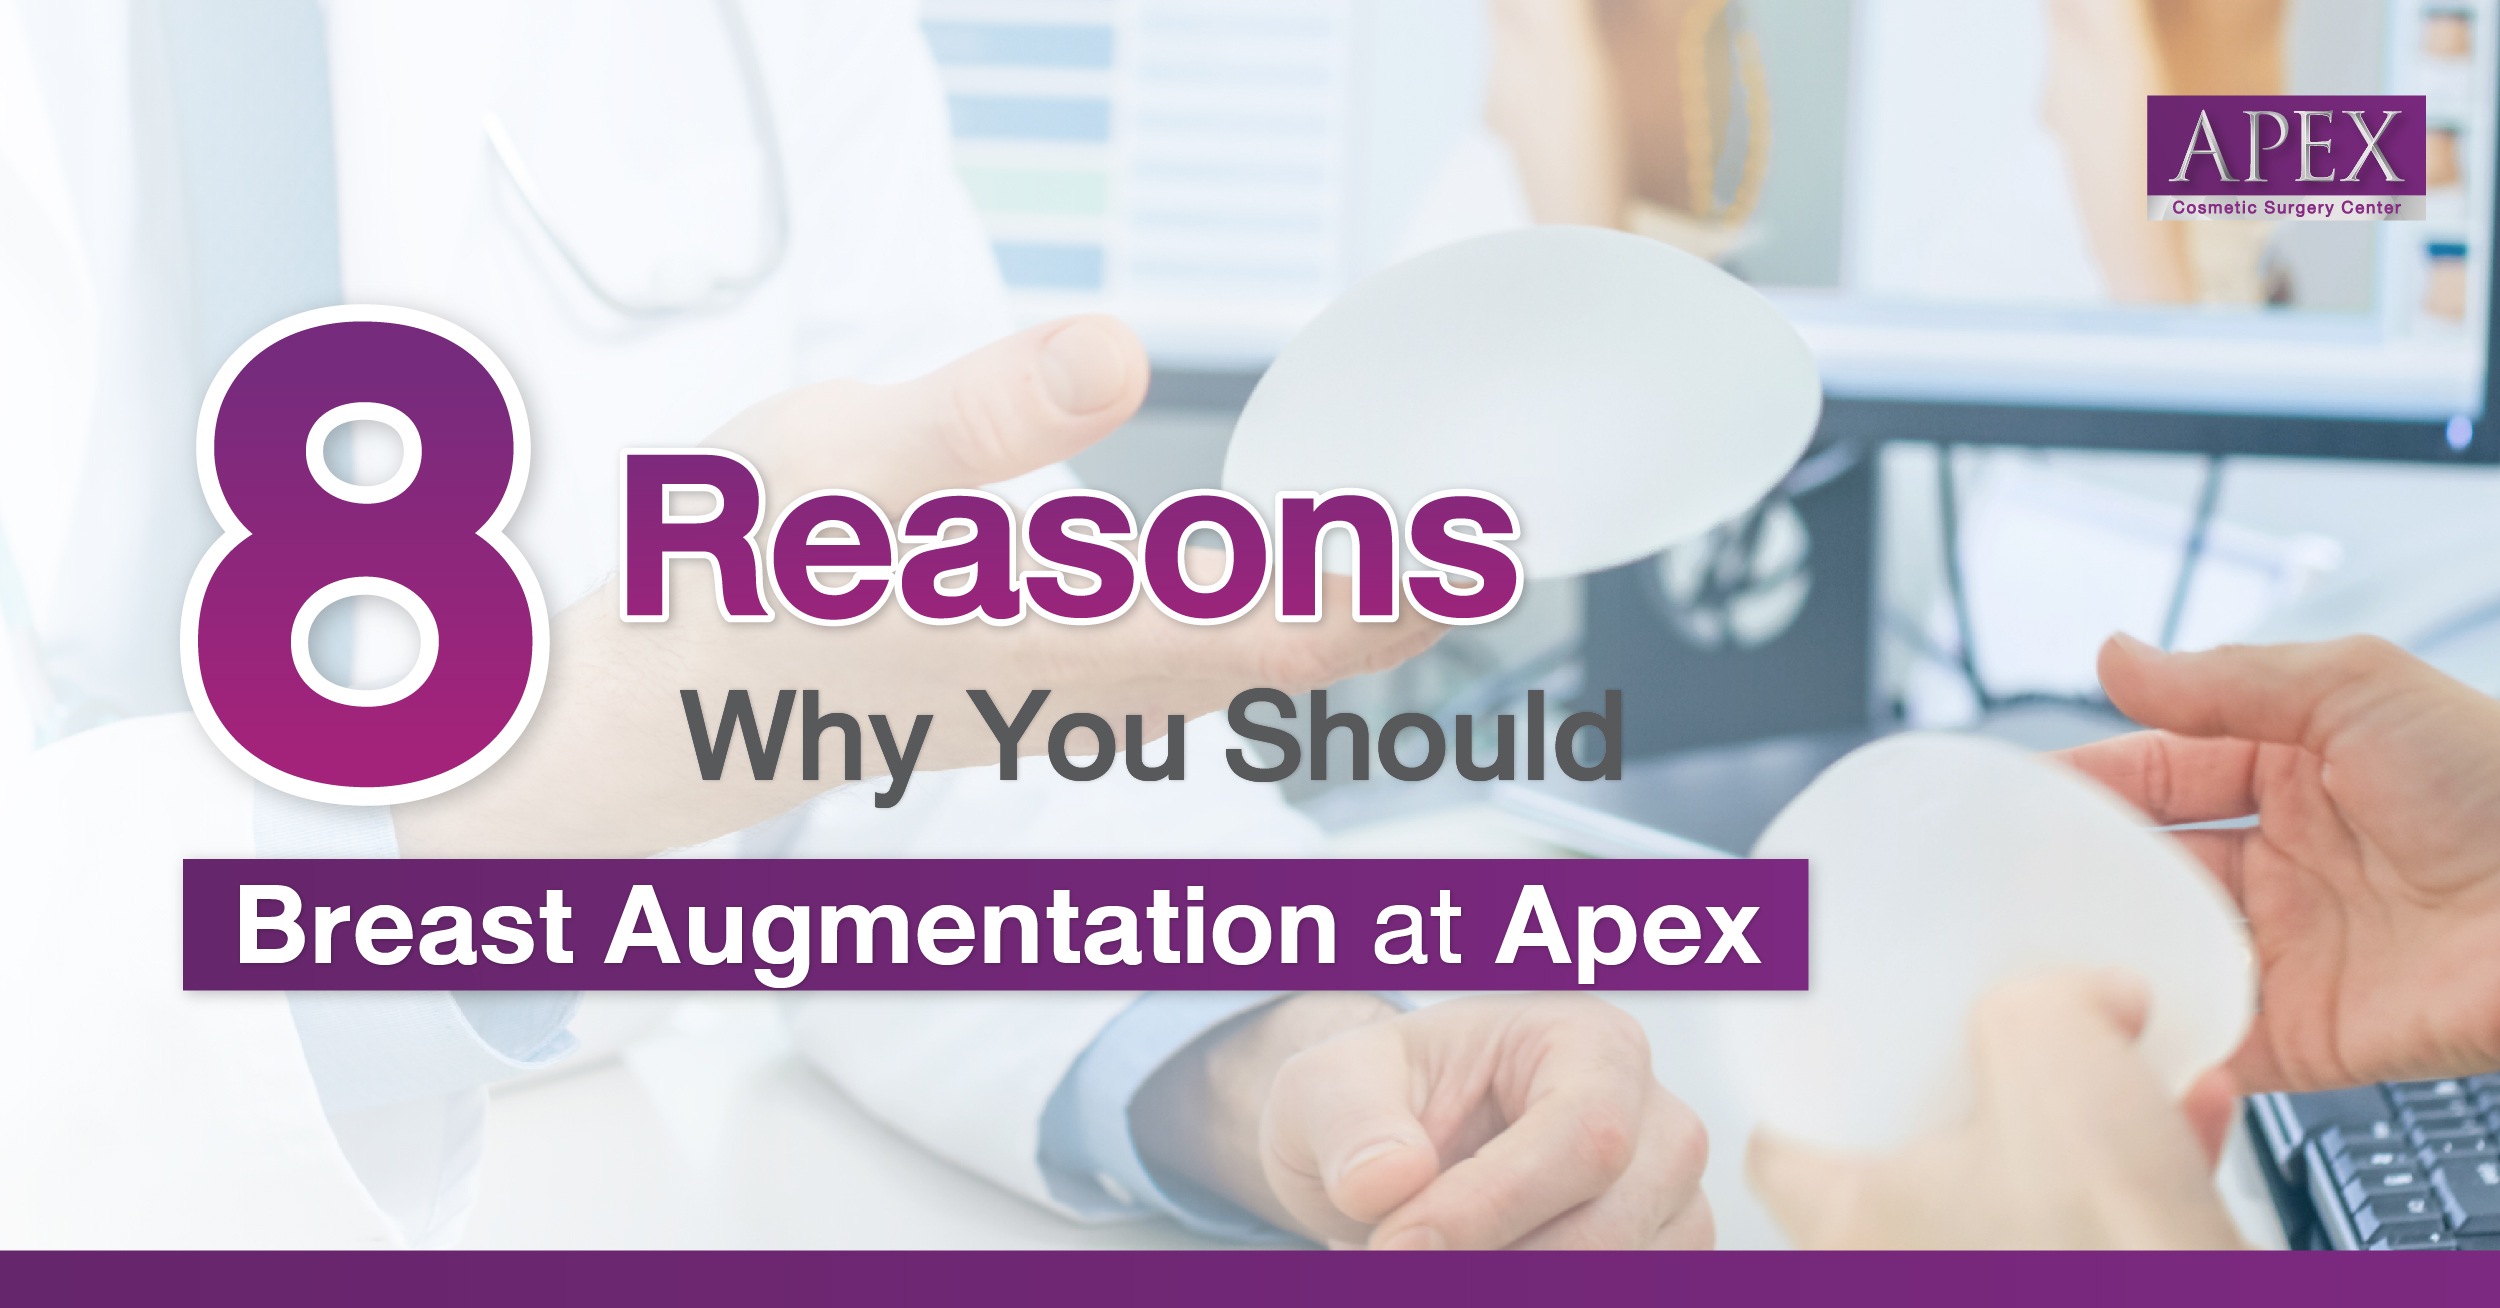 8 Reasons Why You Should Consider Breast Augmentation at Apex